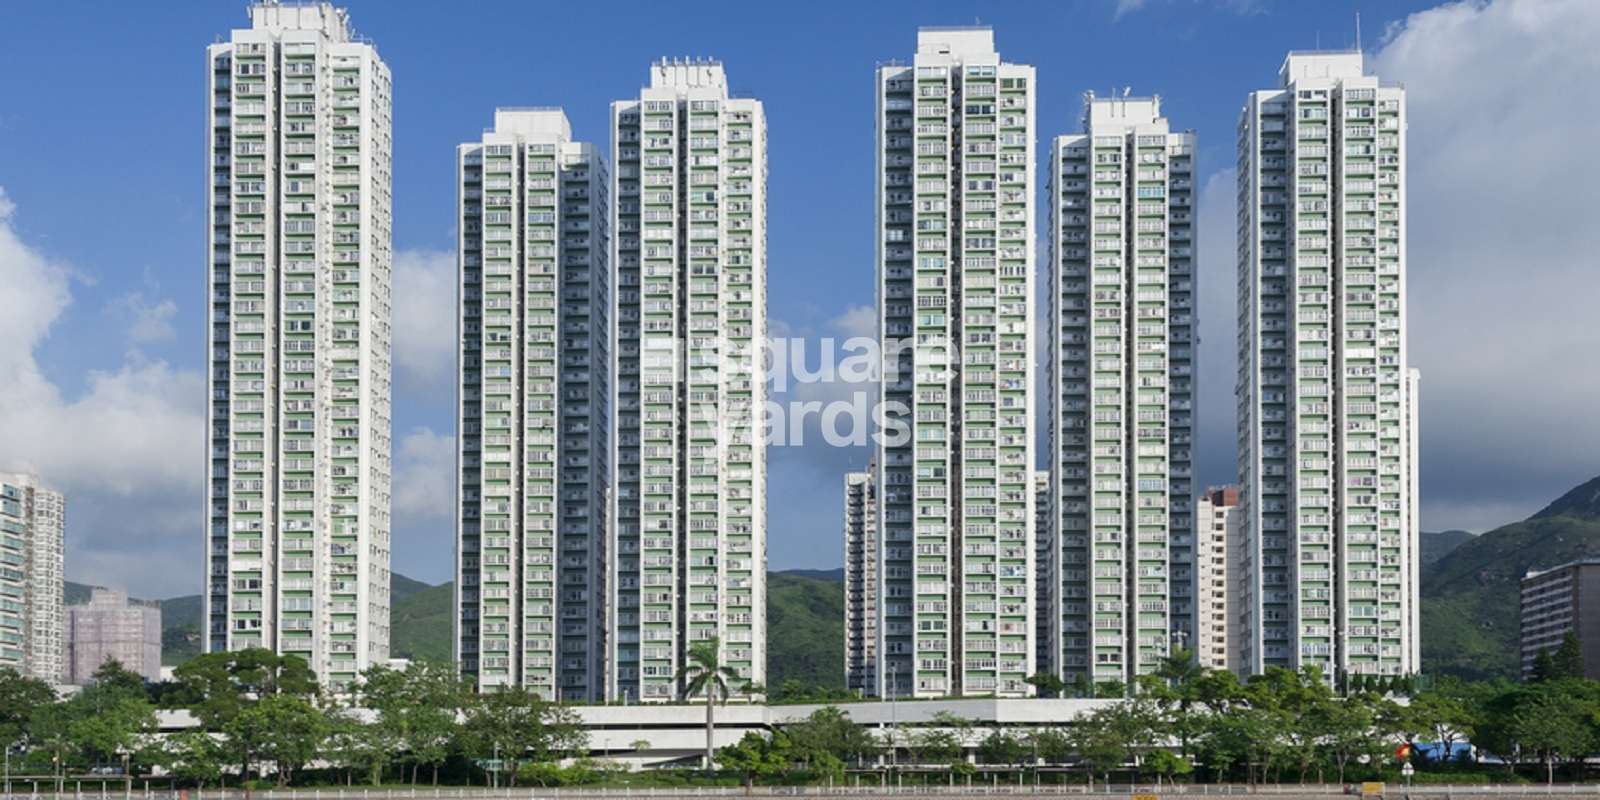 Adhar The Business Capital-High Rise Apartment Cover Image